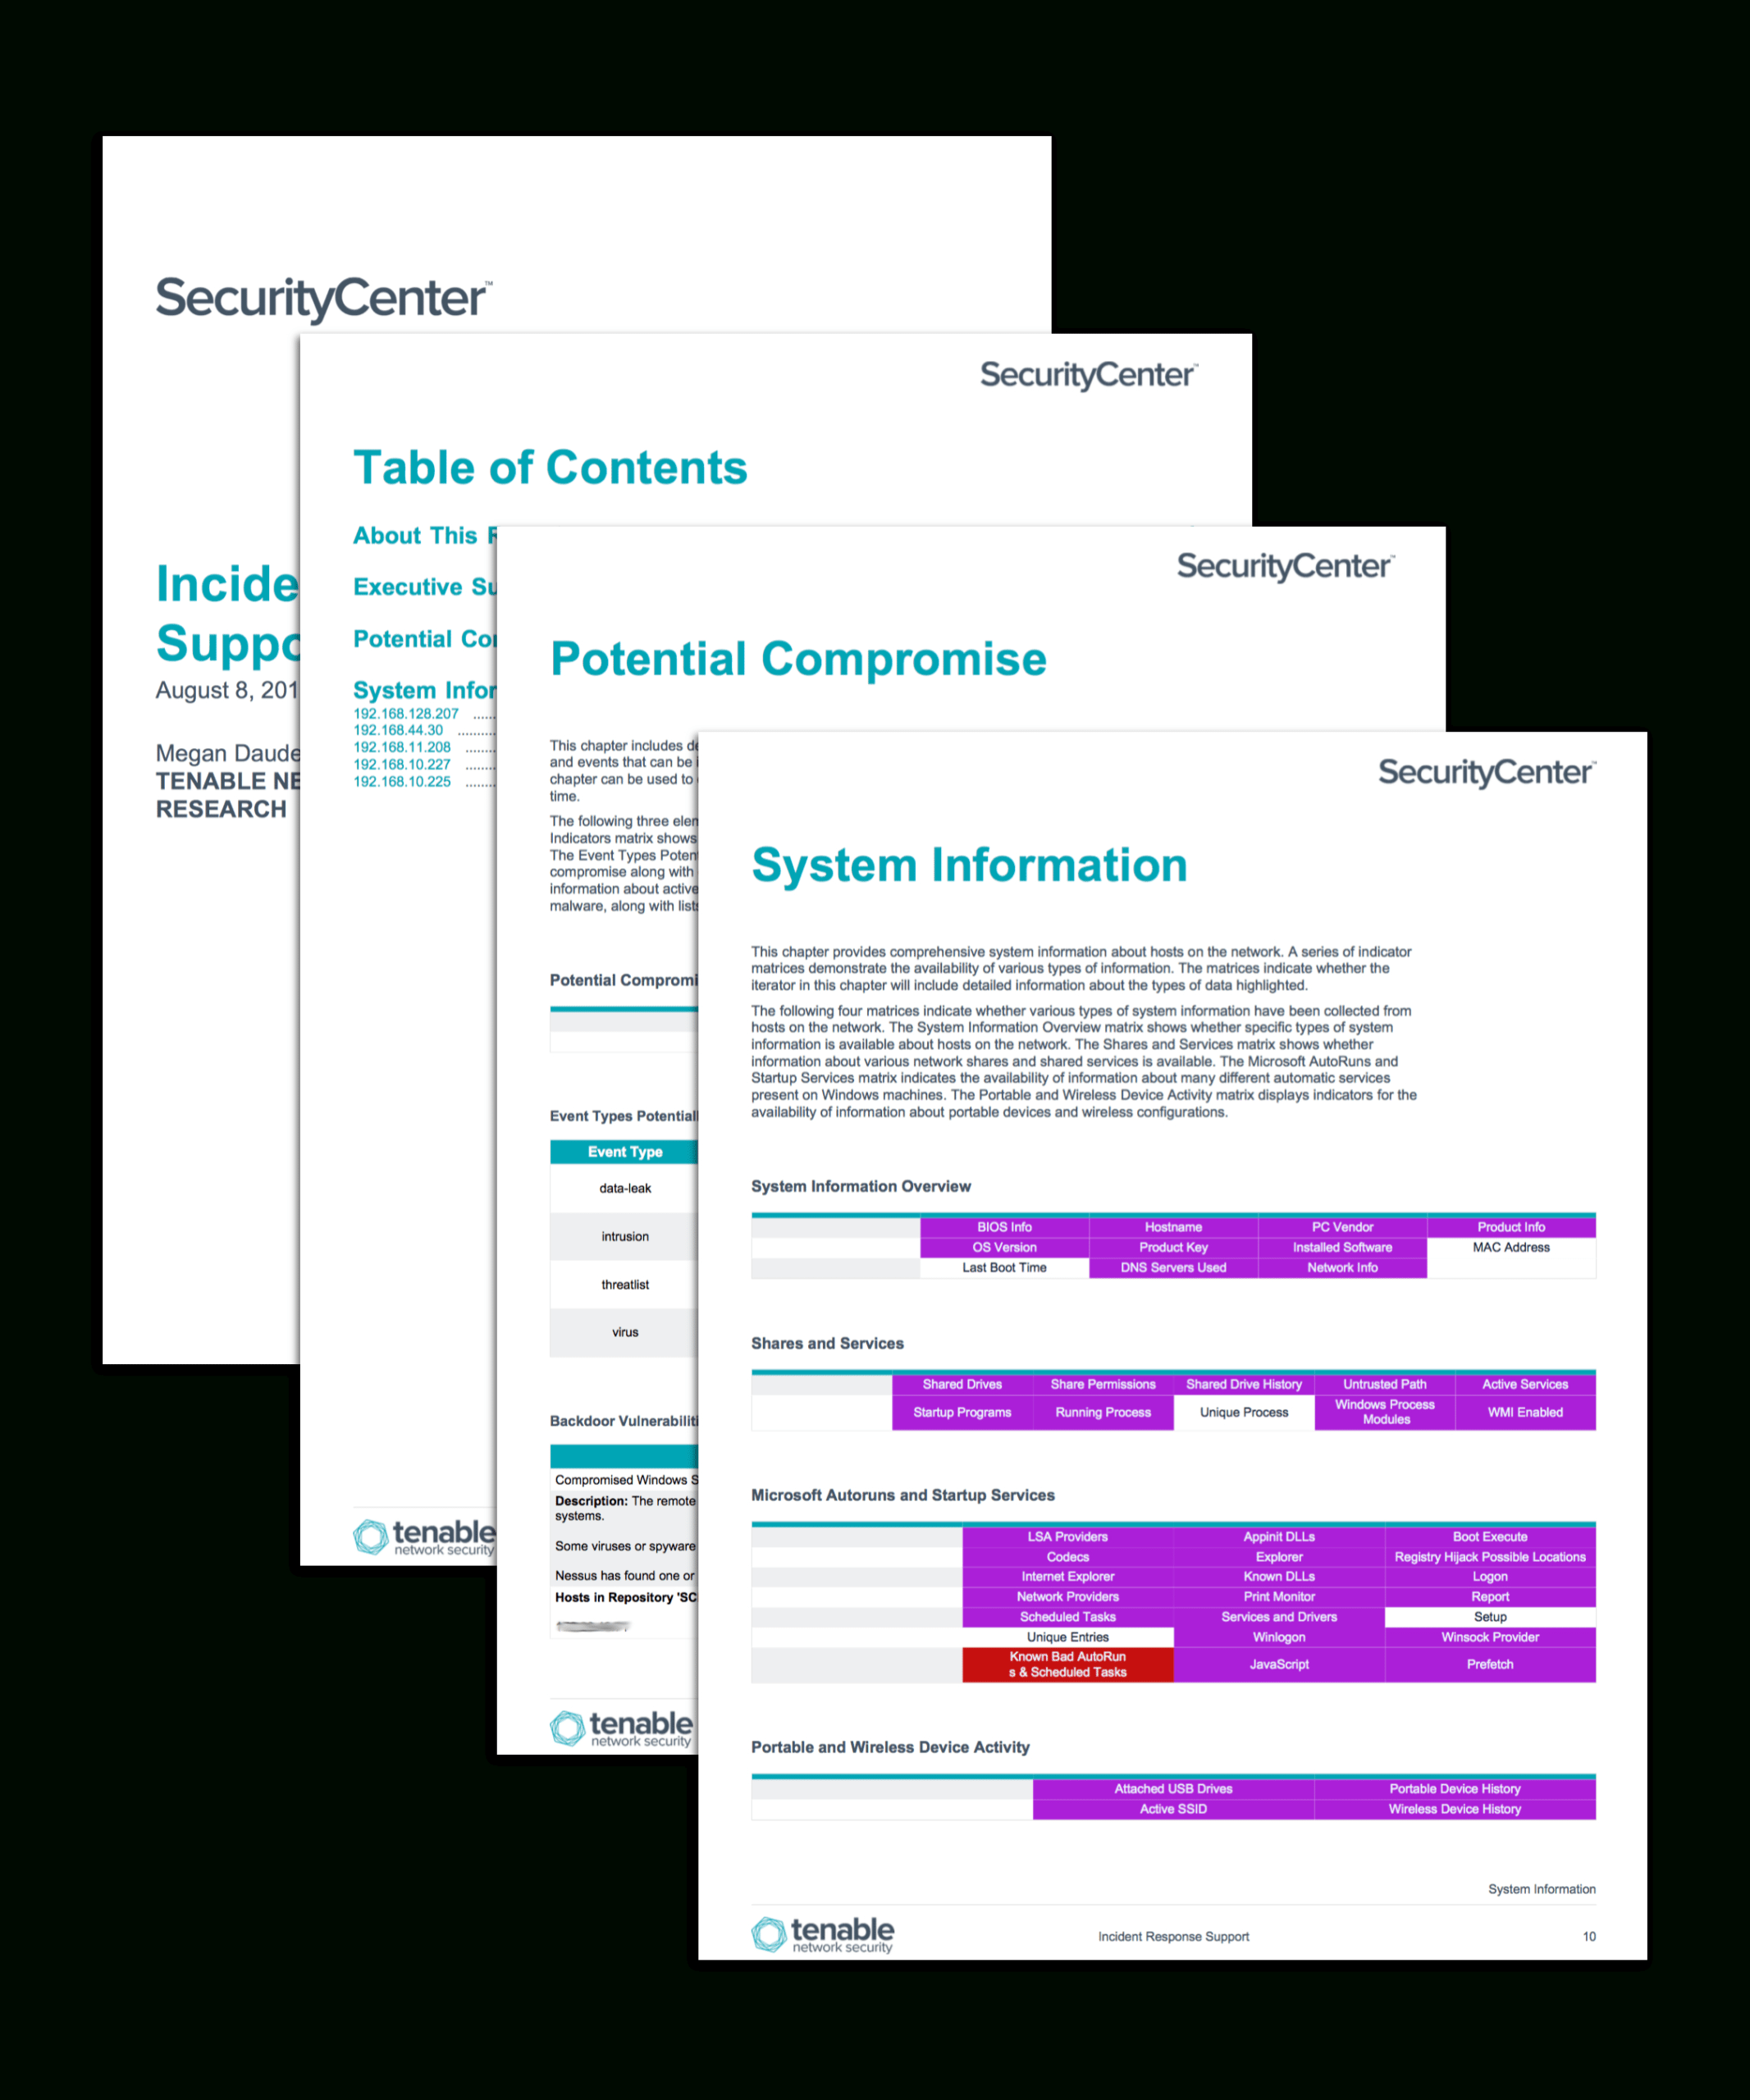 Incident Response Support – Sc Report Template | Tenable® Inside Technical Support Report Template